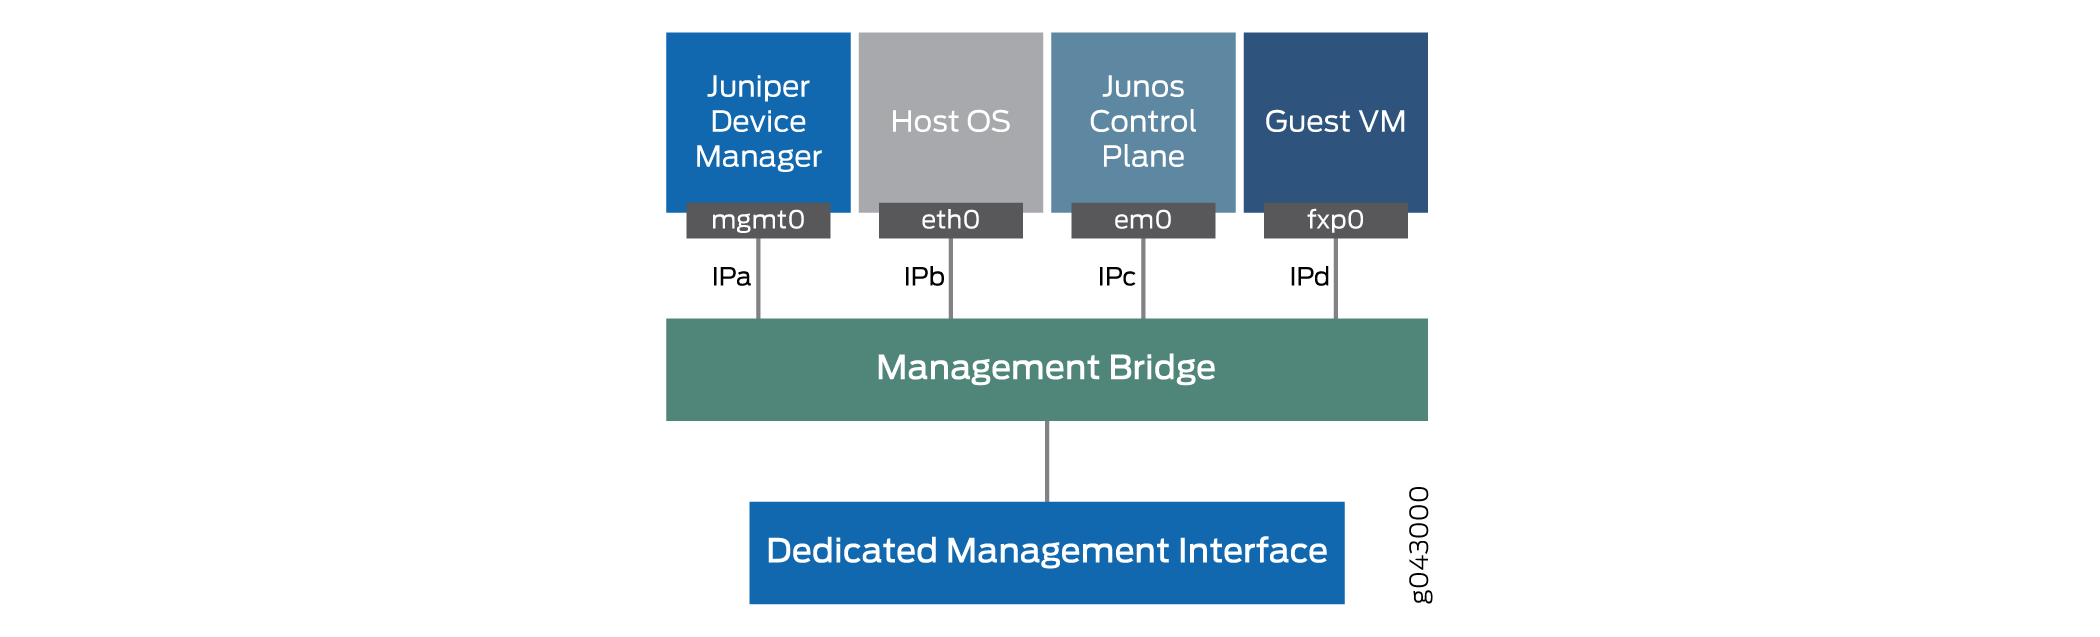 Out-of-band Management Interface